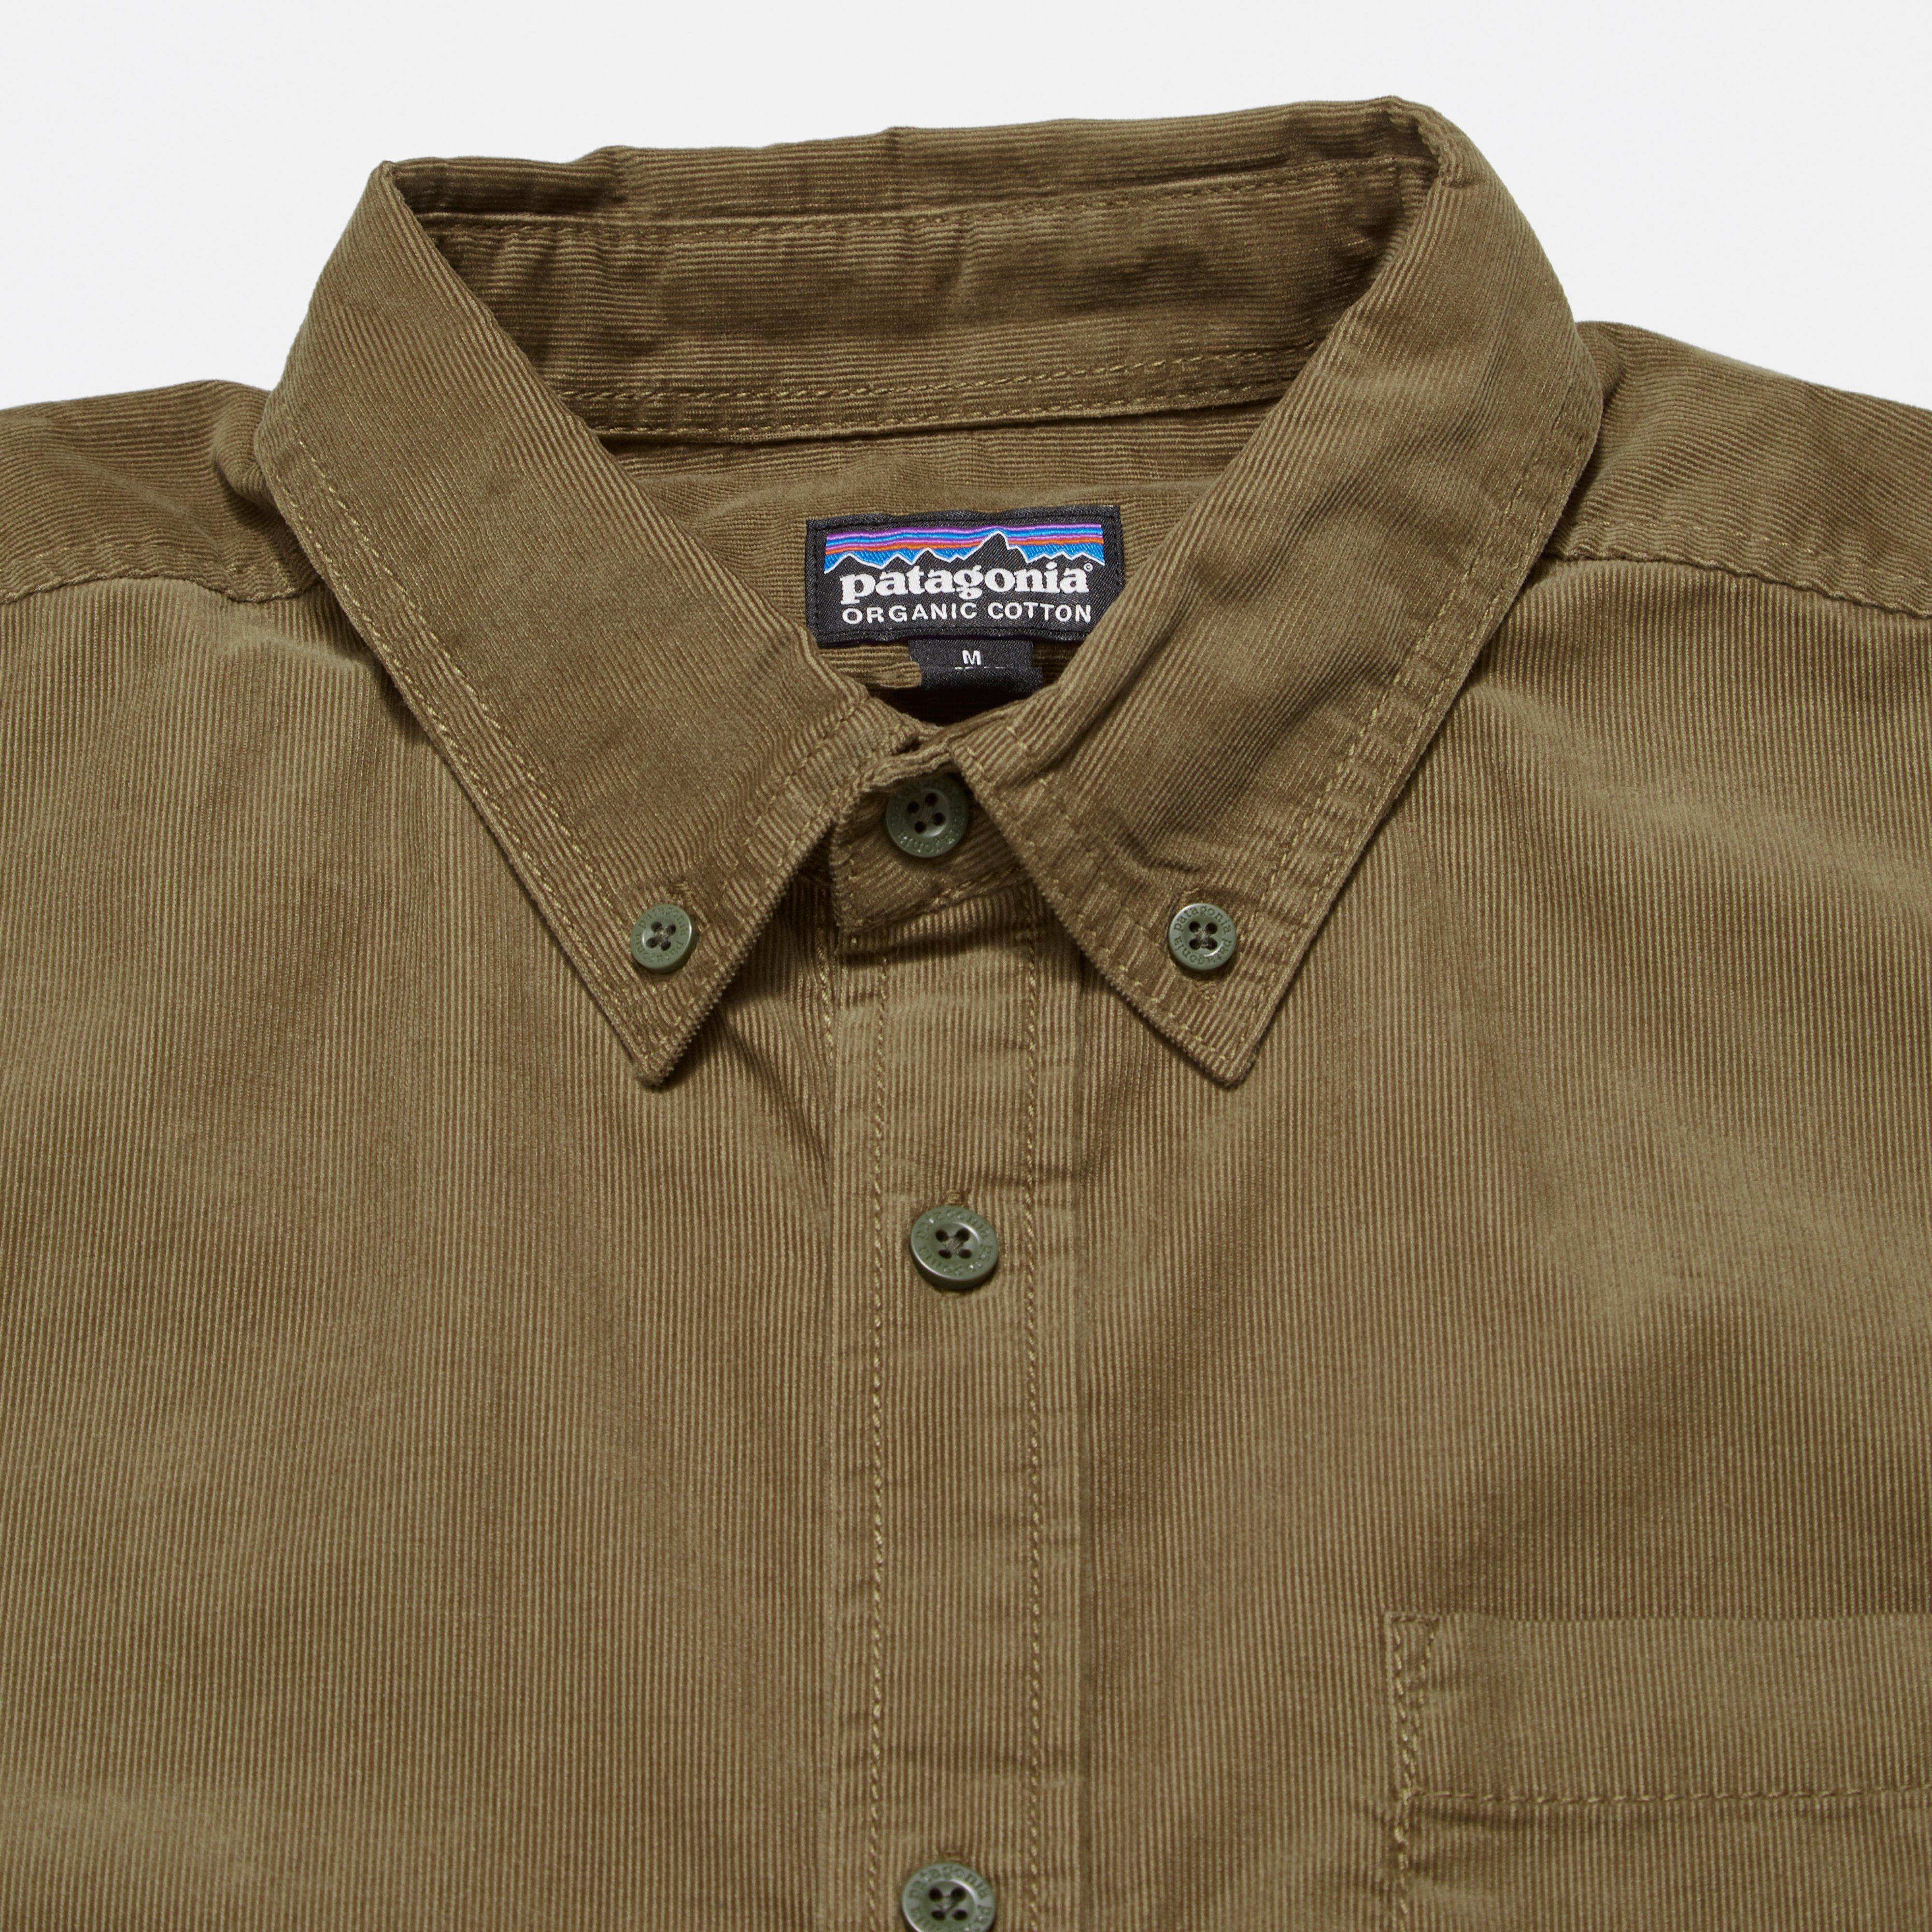 Lyst - Patagonia Bluffside Cord Shirt in Green for Men